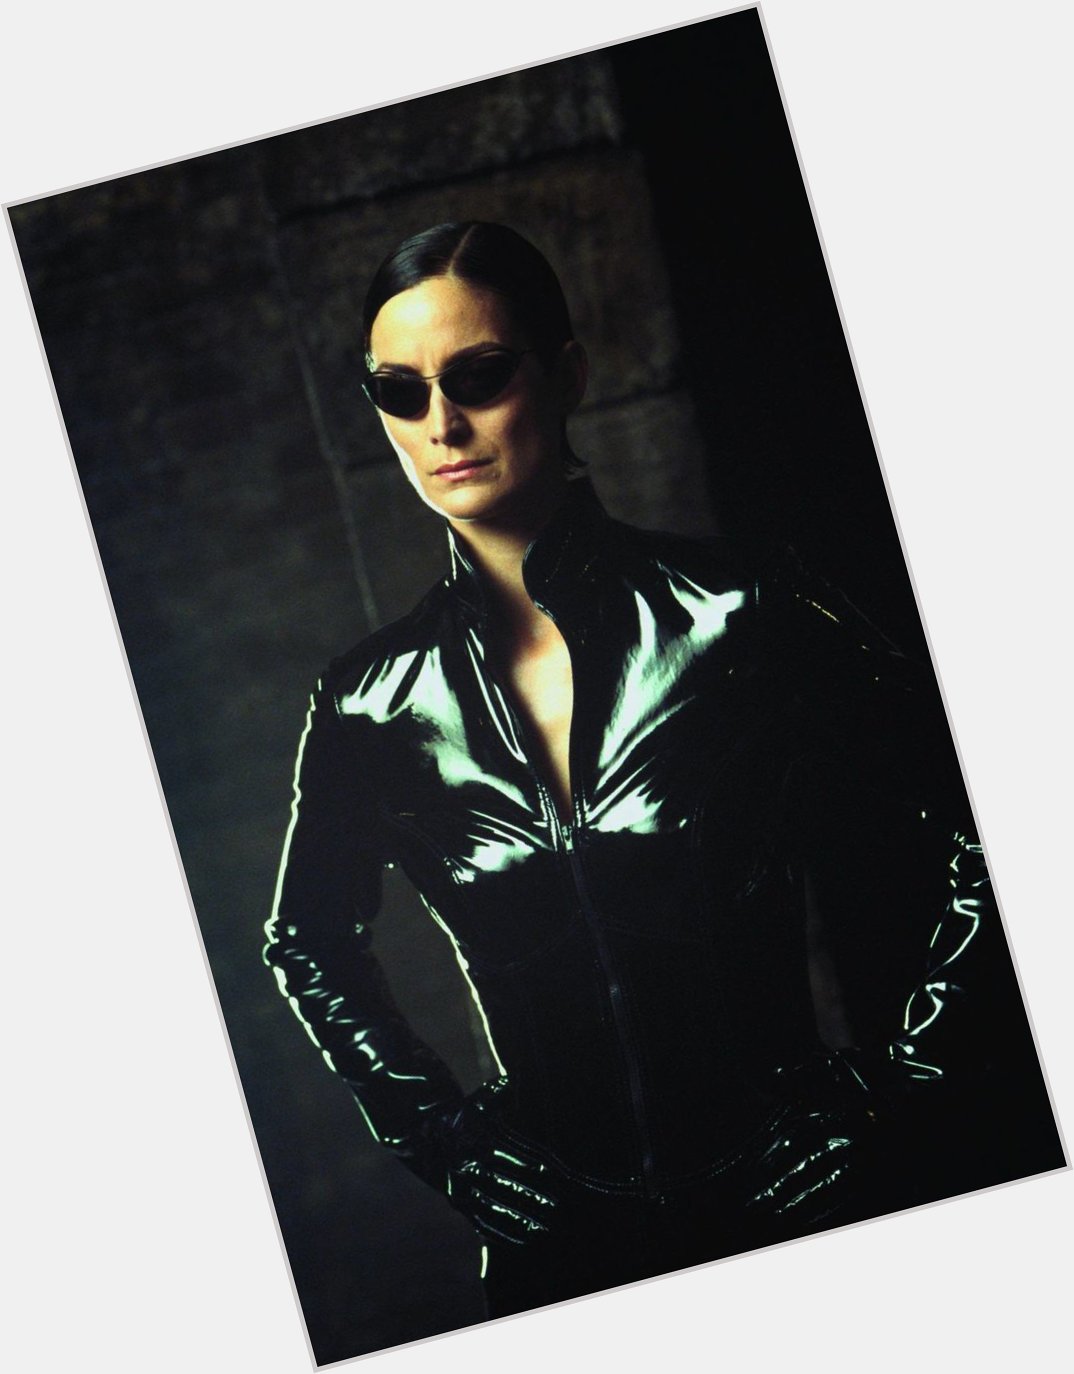 Happy 50th Birthday Carrie-Anne Moss. Her greatest birthday present being the Solar Eclipse 